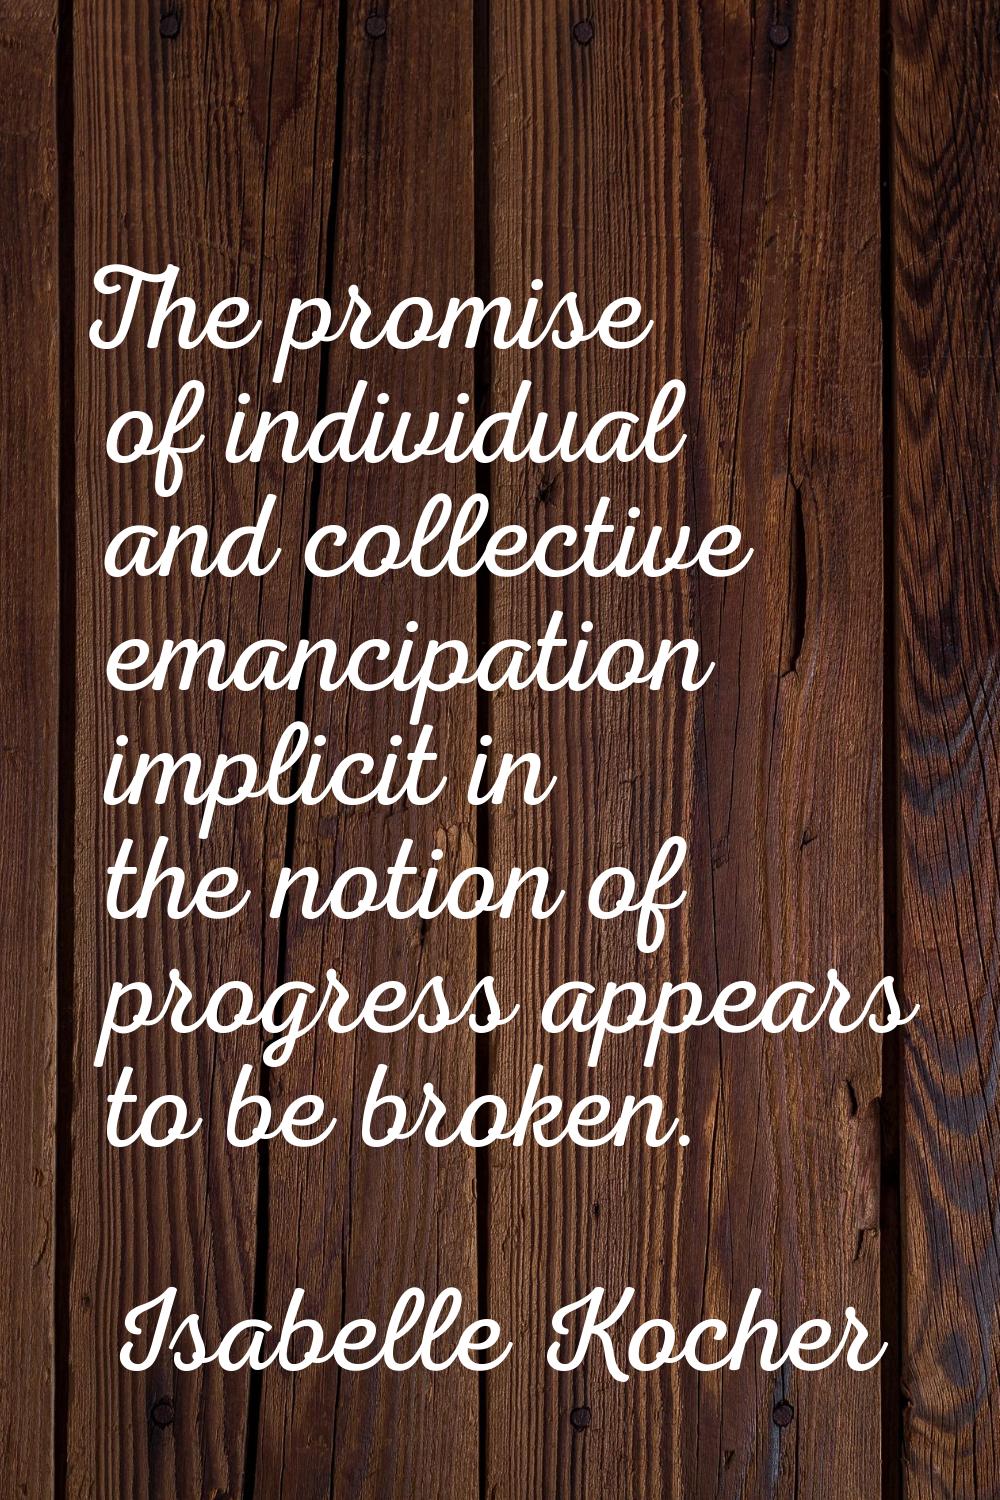 The promise of individual and collective emancipation implicit in the notion of progress appears to